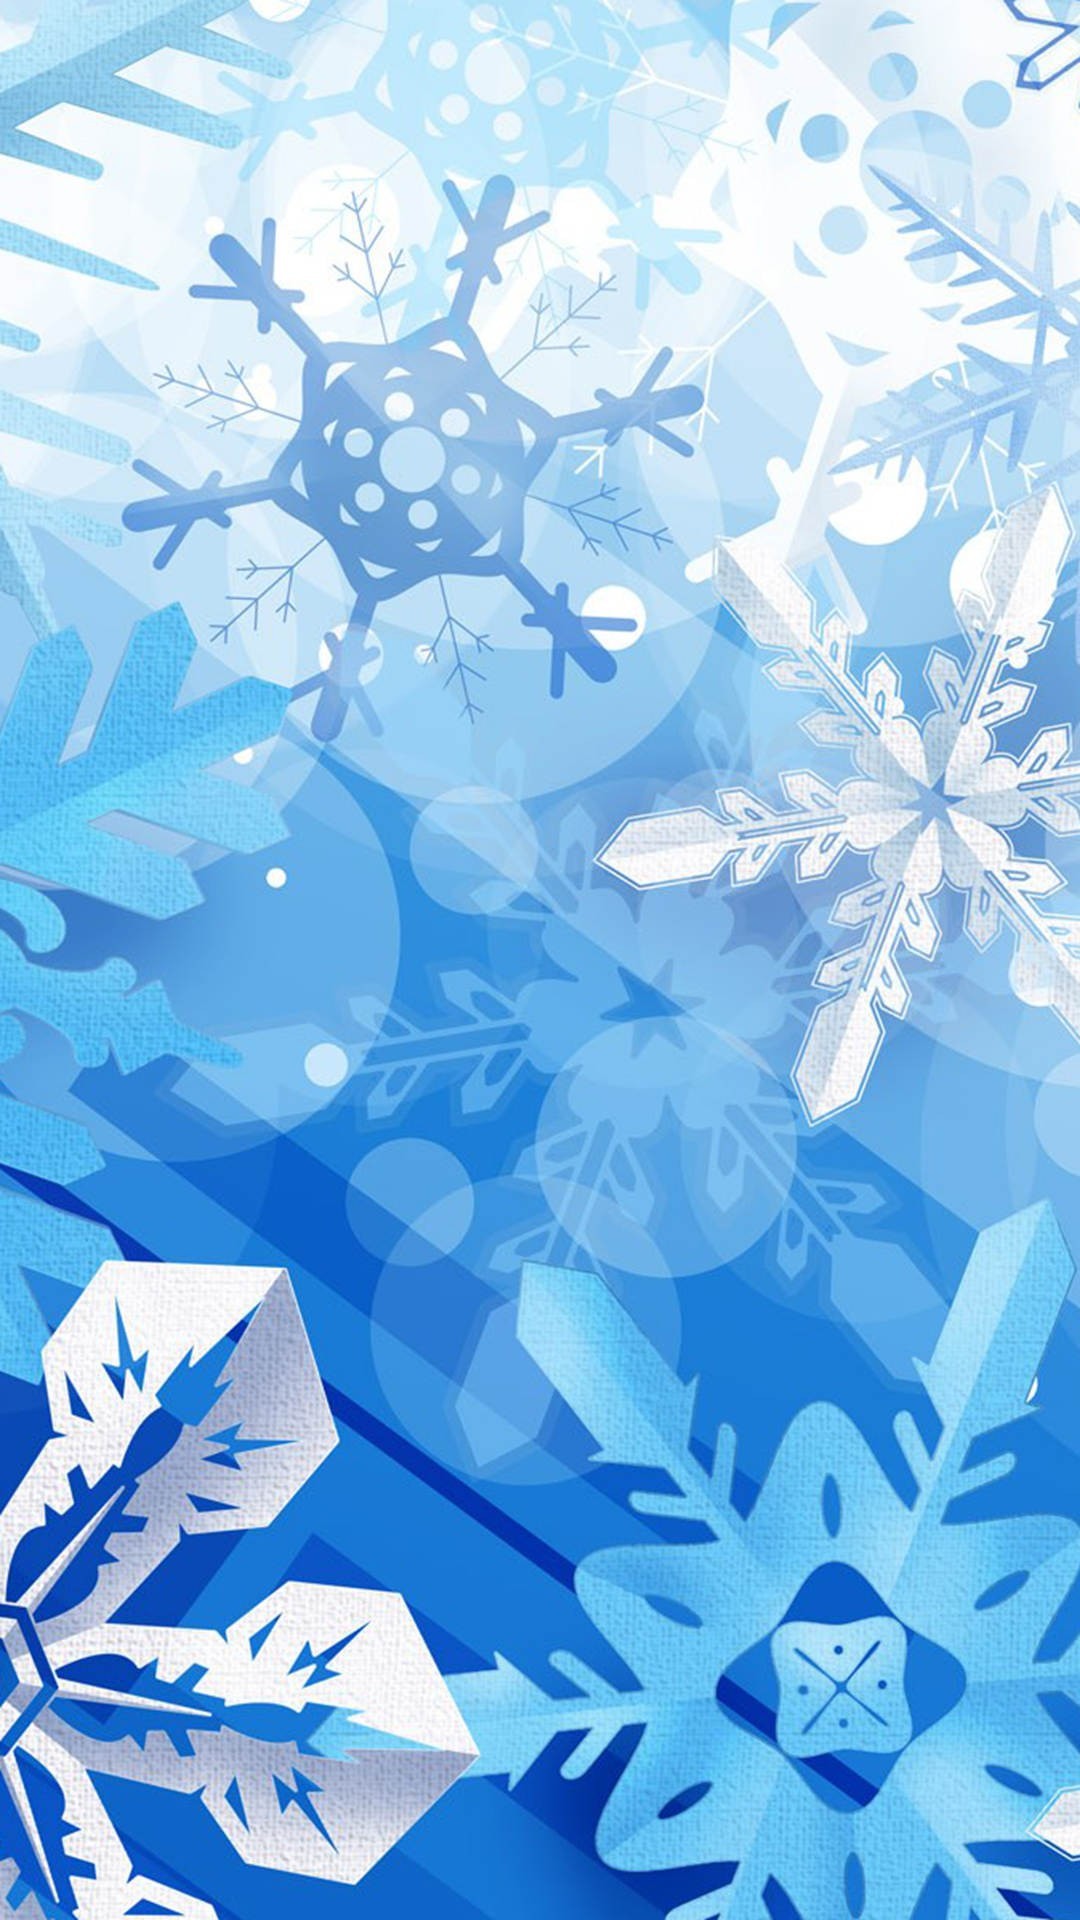 1080x1920 Snowflakes HD iPhone 6 plus wallpaper for 2014 Christmas